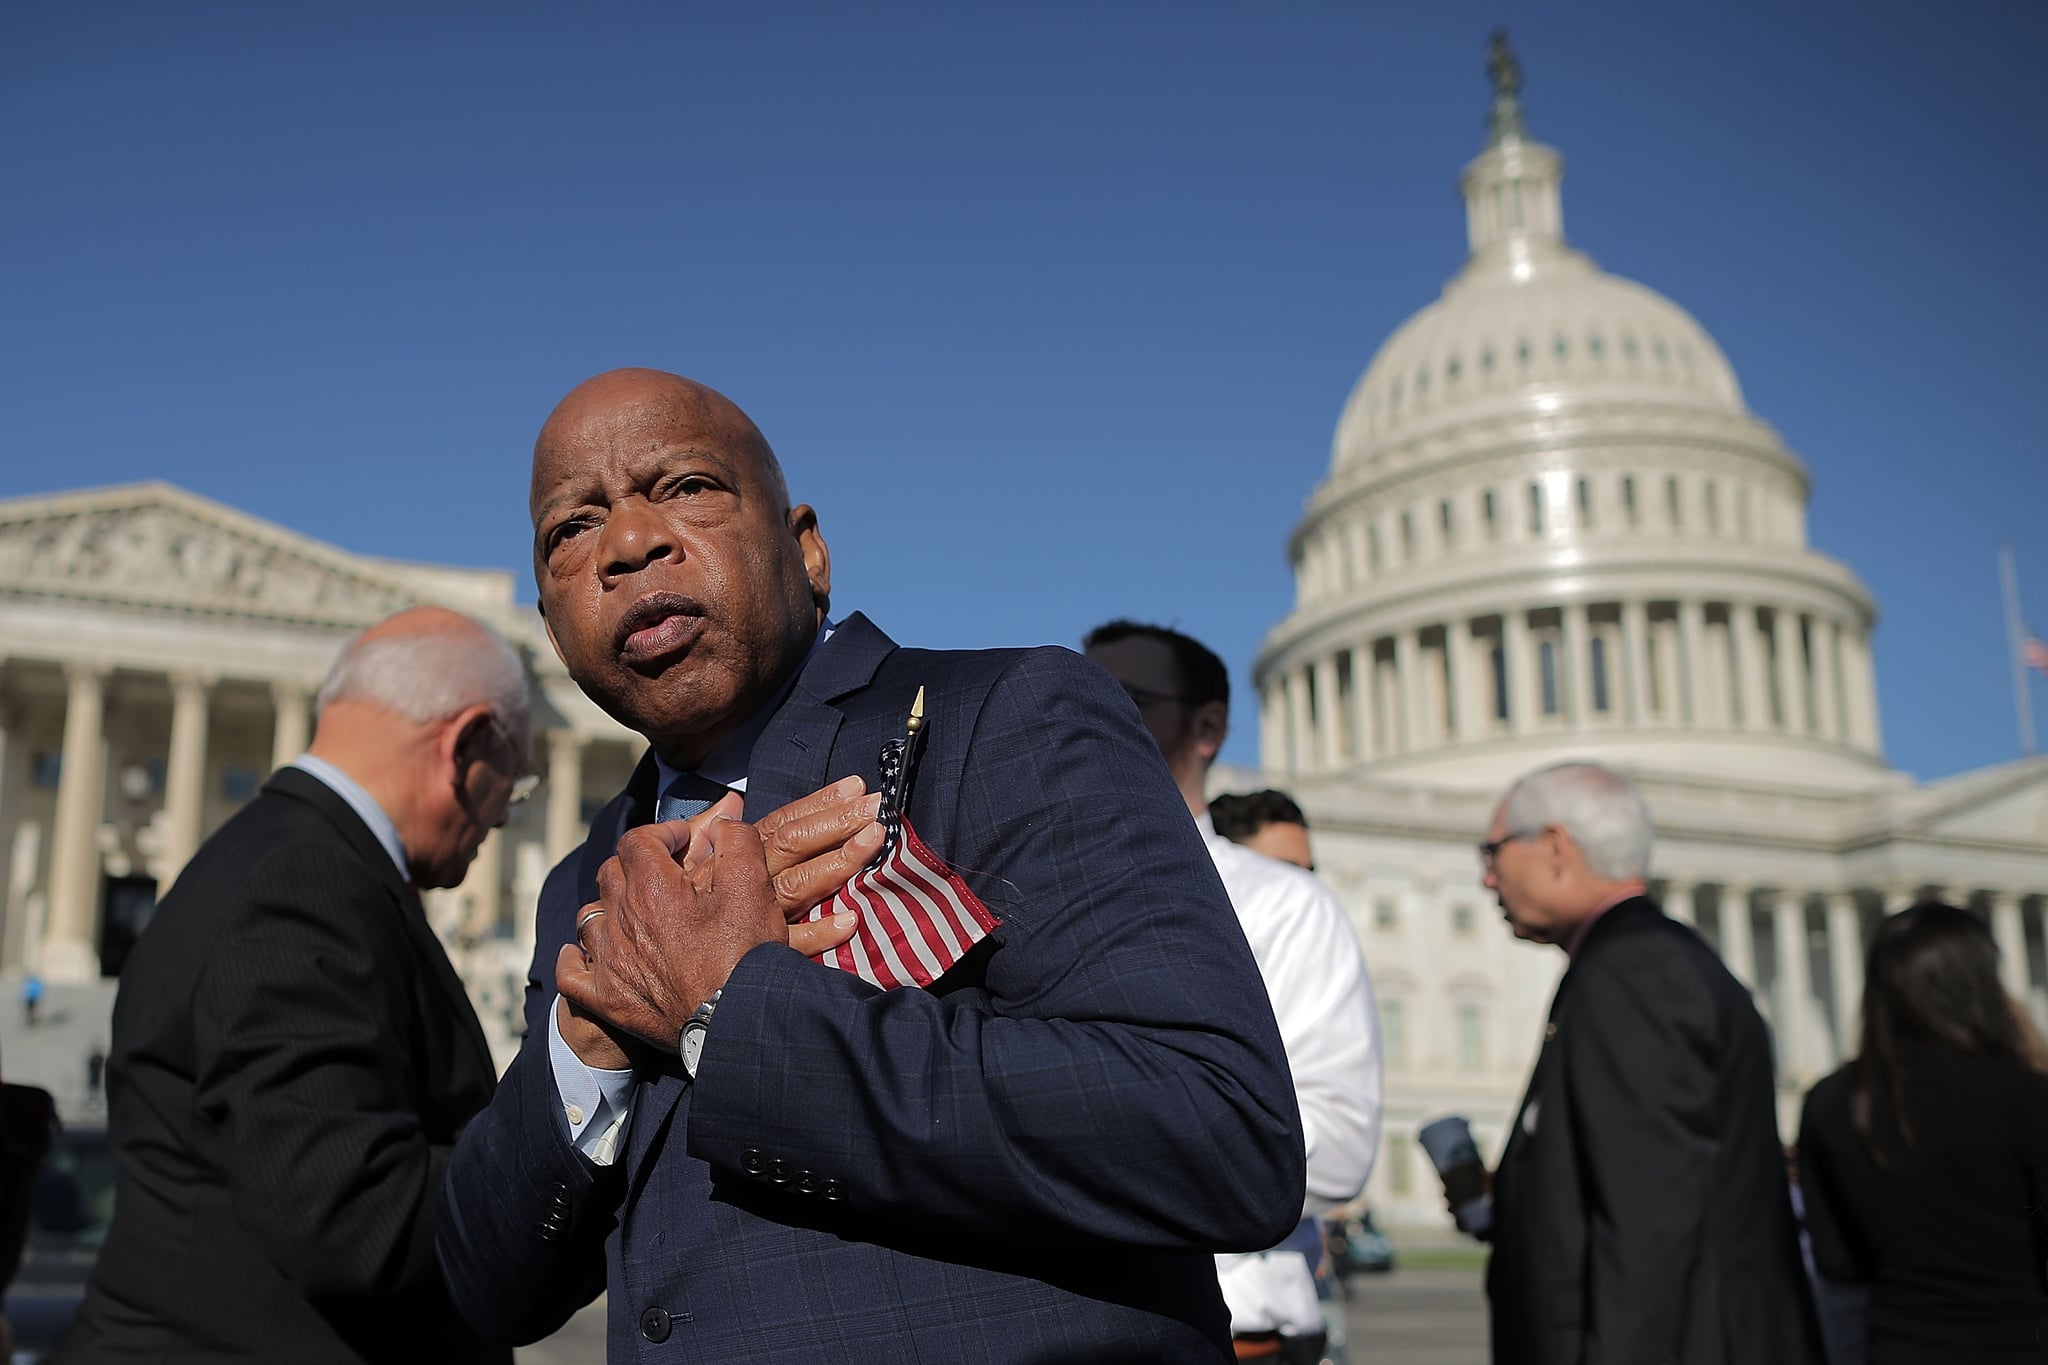 WASHINGTON, DC - OCTOBER 04:  Rep. John Lewis (D-GA) thanks anti-gun violence supporters following a rally with fellow Democrats on the East Front steps of the U.S. House of Representatives October 4, 2017 in Washington, DC. The Democratic members of Congress held the rally to honor the victims of the mass shooting in Las Vegas and to demand passage of the bipartisan King-Thompson legislation to strengthen background checks and establishing a bipartisan Select Committee on Gun Violence.  (Photo by Chip Somodevilla/Getty Images)